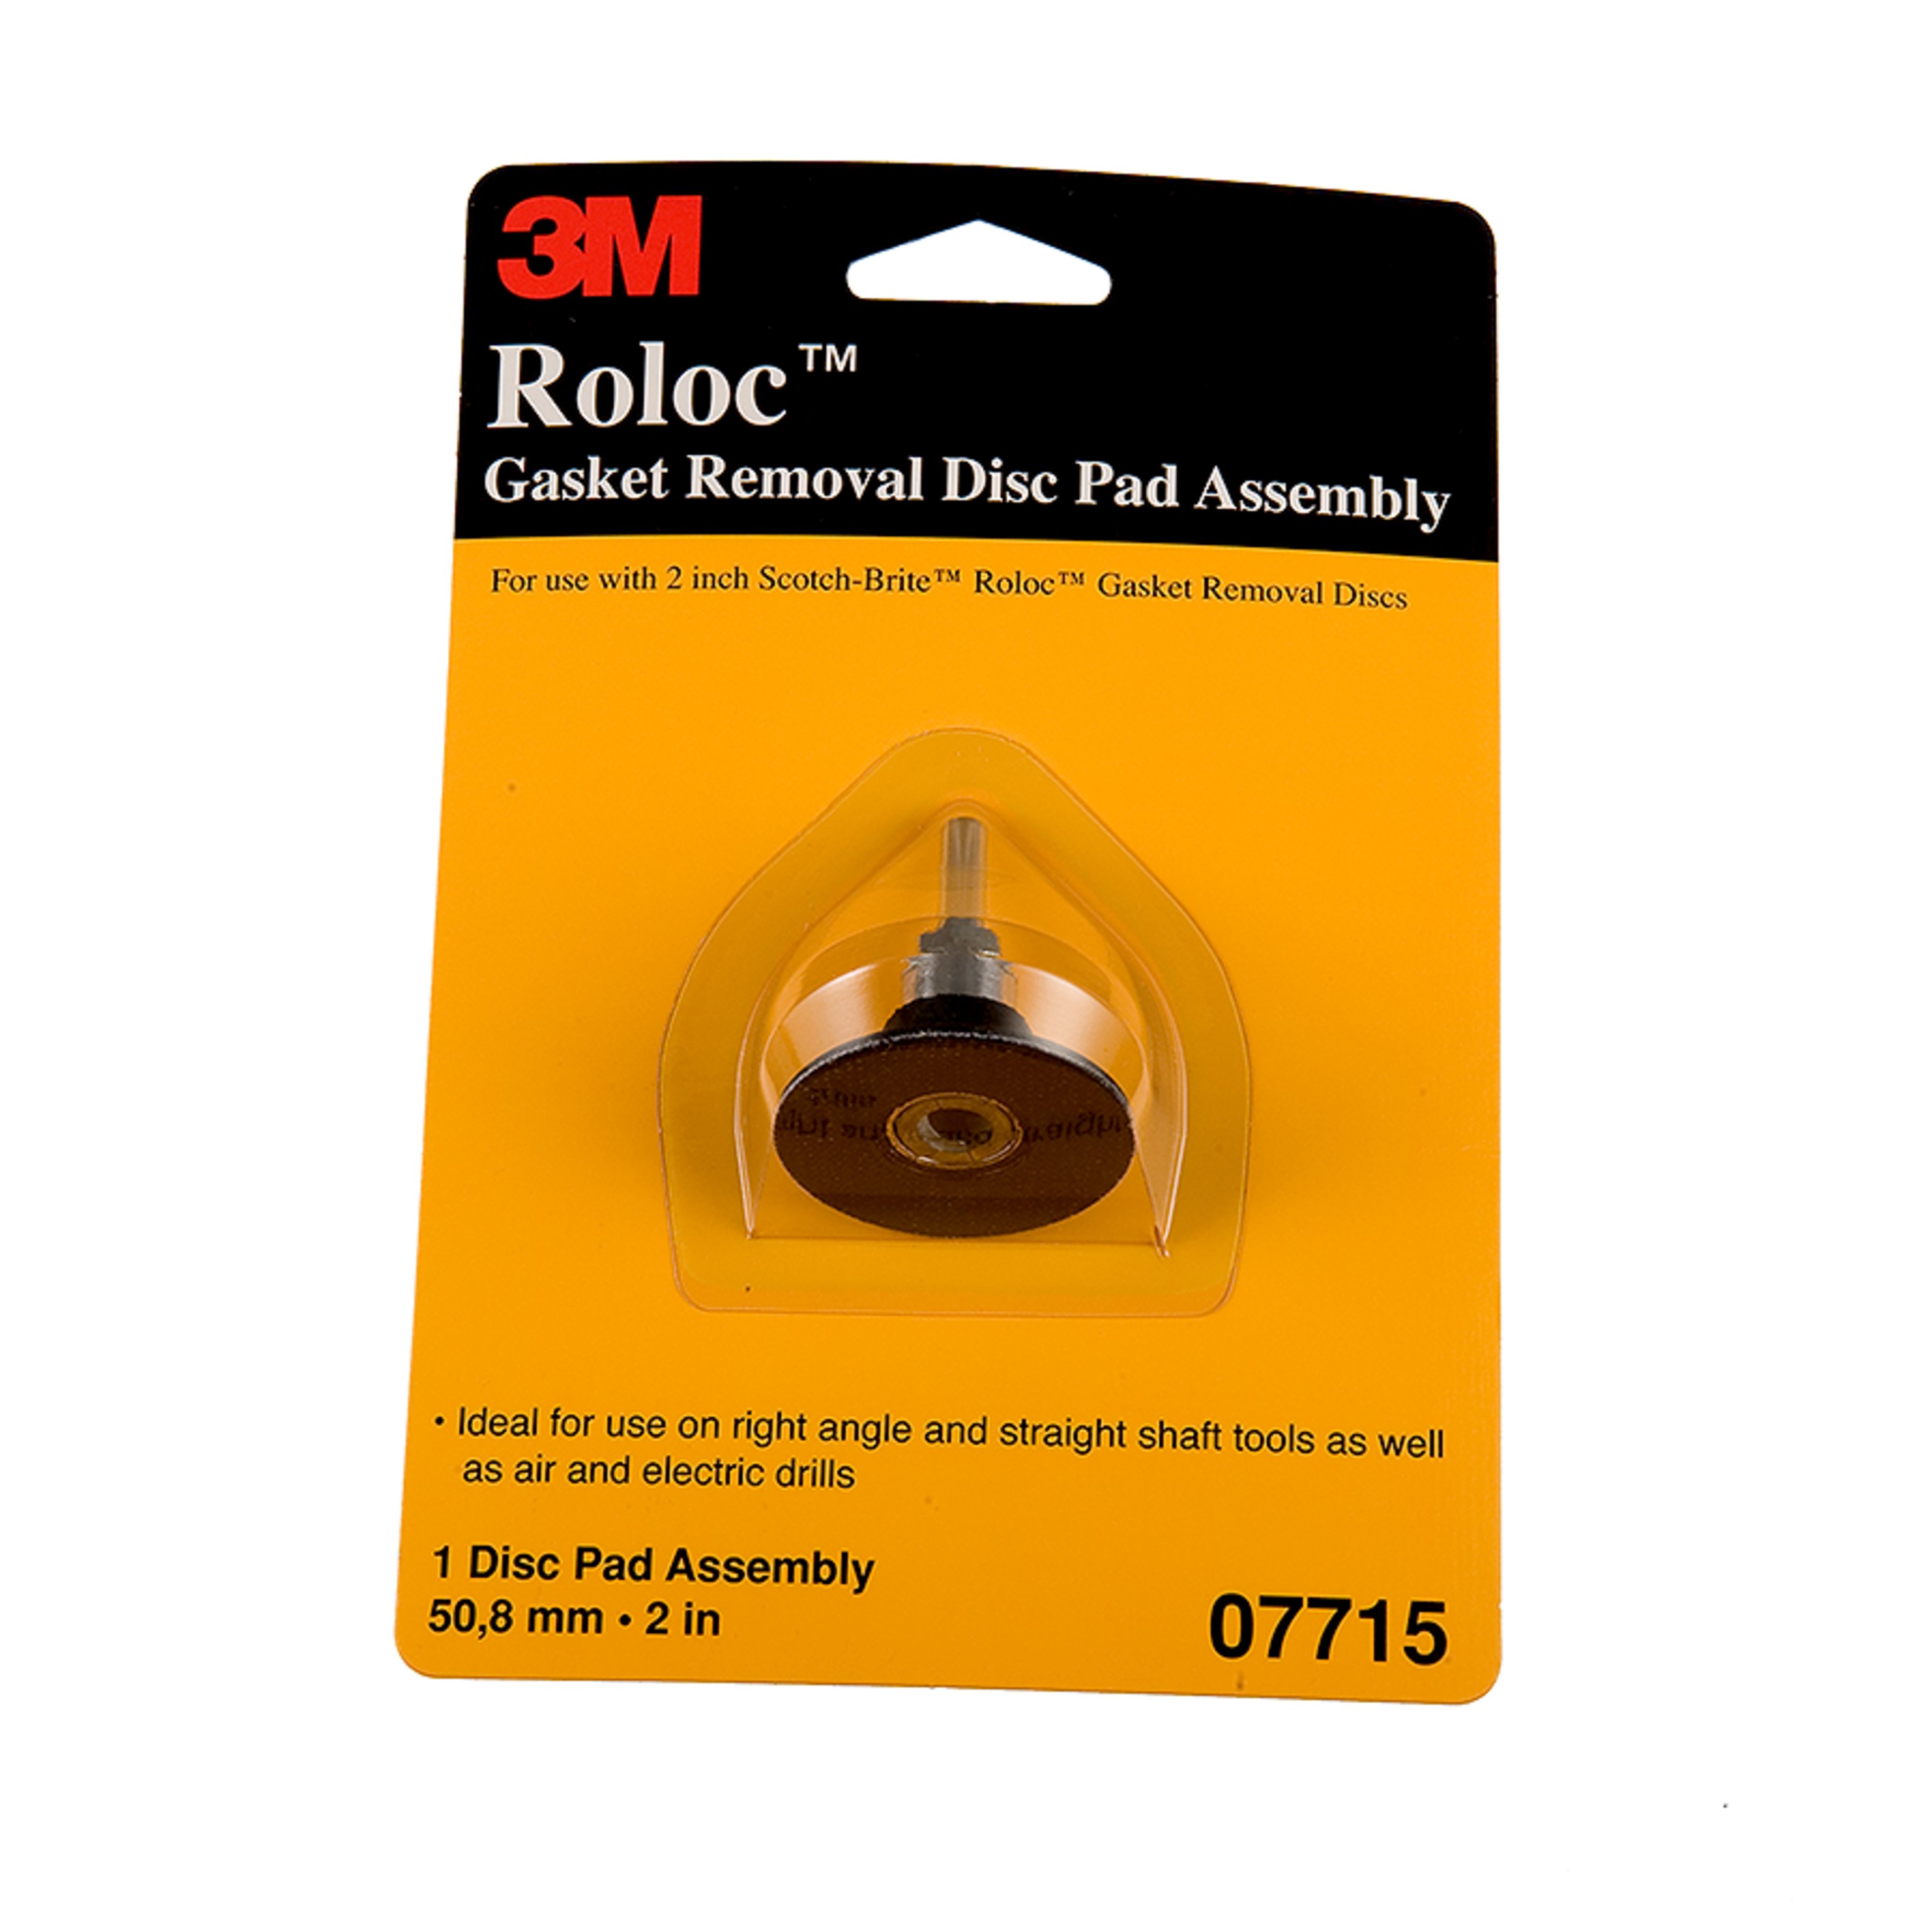 3M™ Roloc™ Gasket Removal Disc Pad Assembly includes the backup pad, steel shaft and adapter needed to mount thr Scotch-Brite™ Roloc™ Gasket Removal Disc to your power tool.